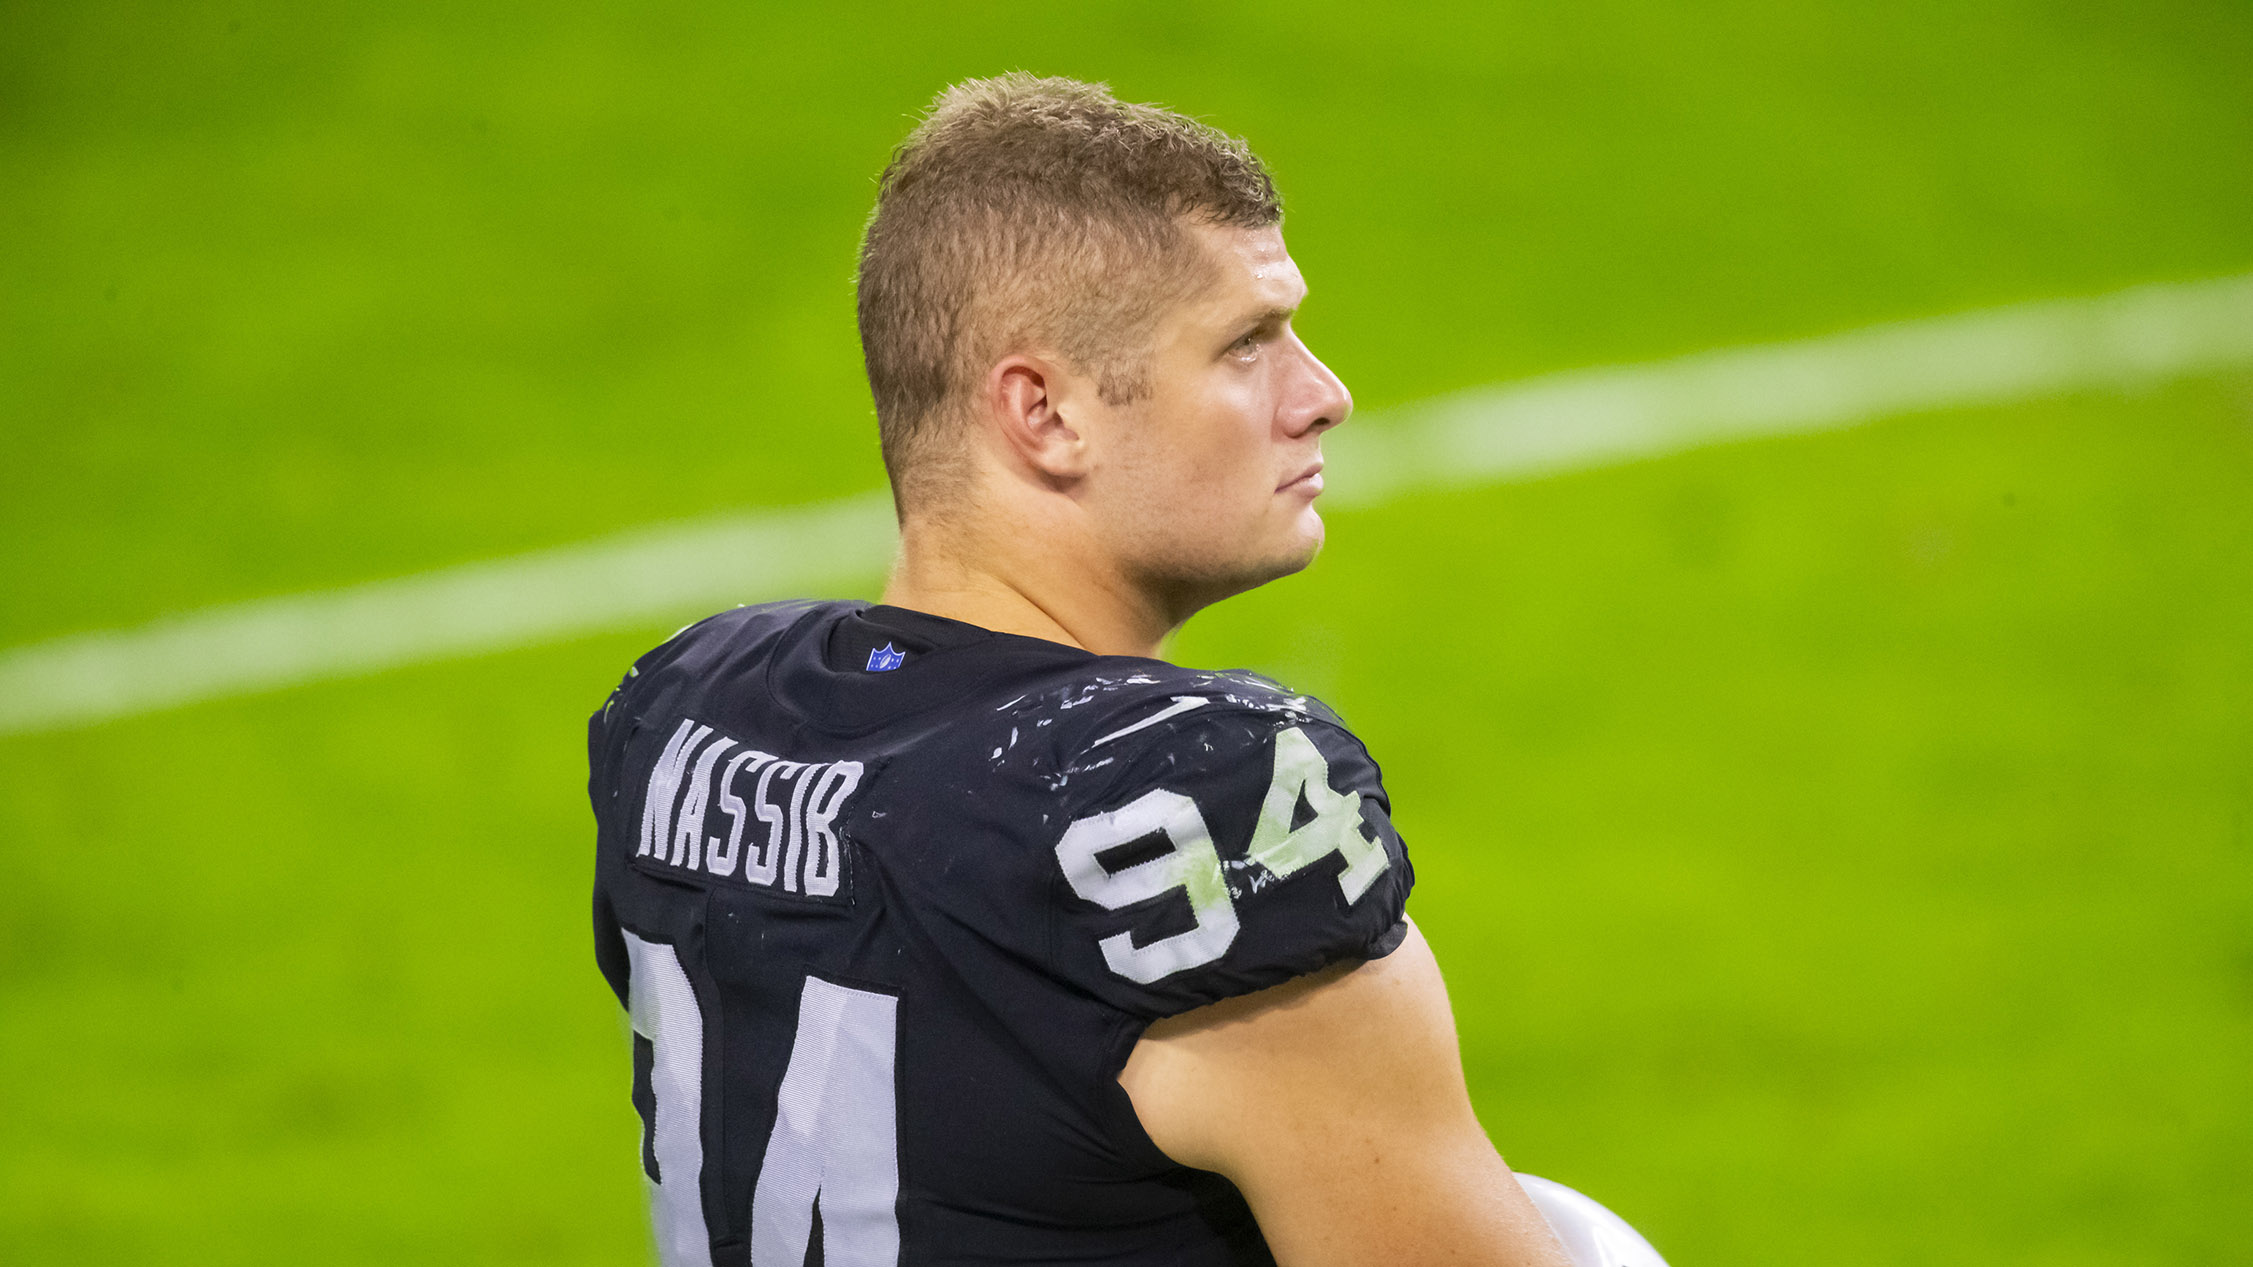 Raiders' Carl Nassib Comes Out as First Active Gay NFL Player